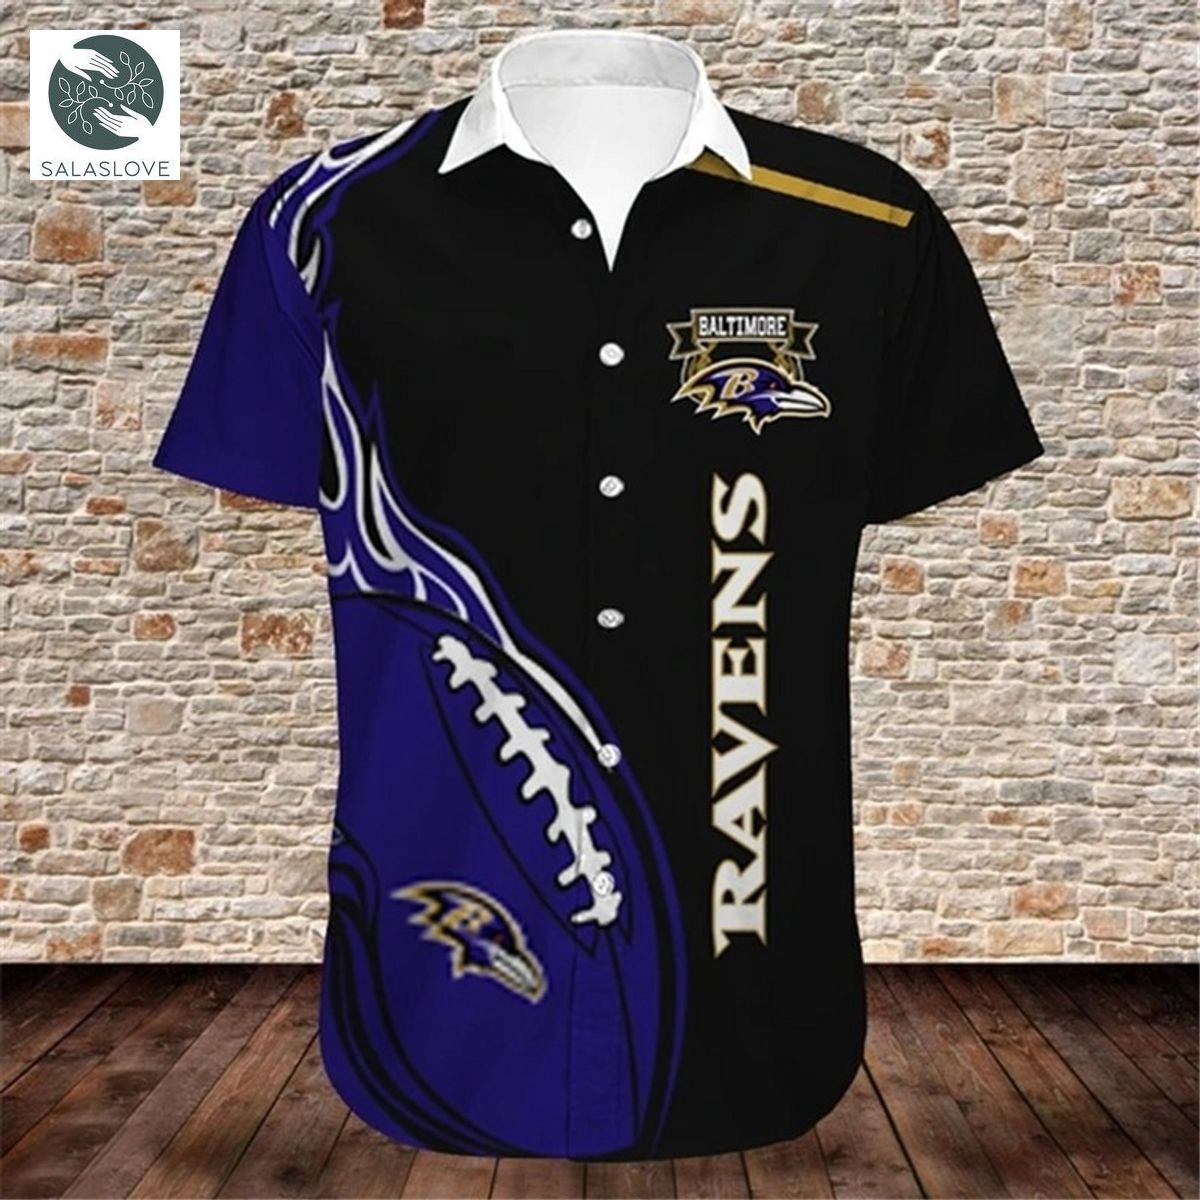 Baltimore Ravens Shirts Cute Flame Balls graphic gift for men